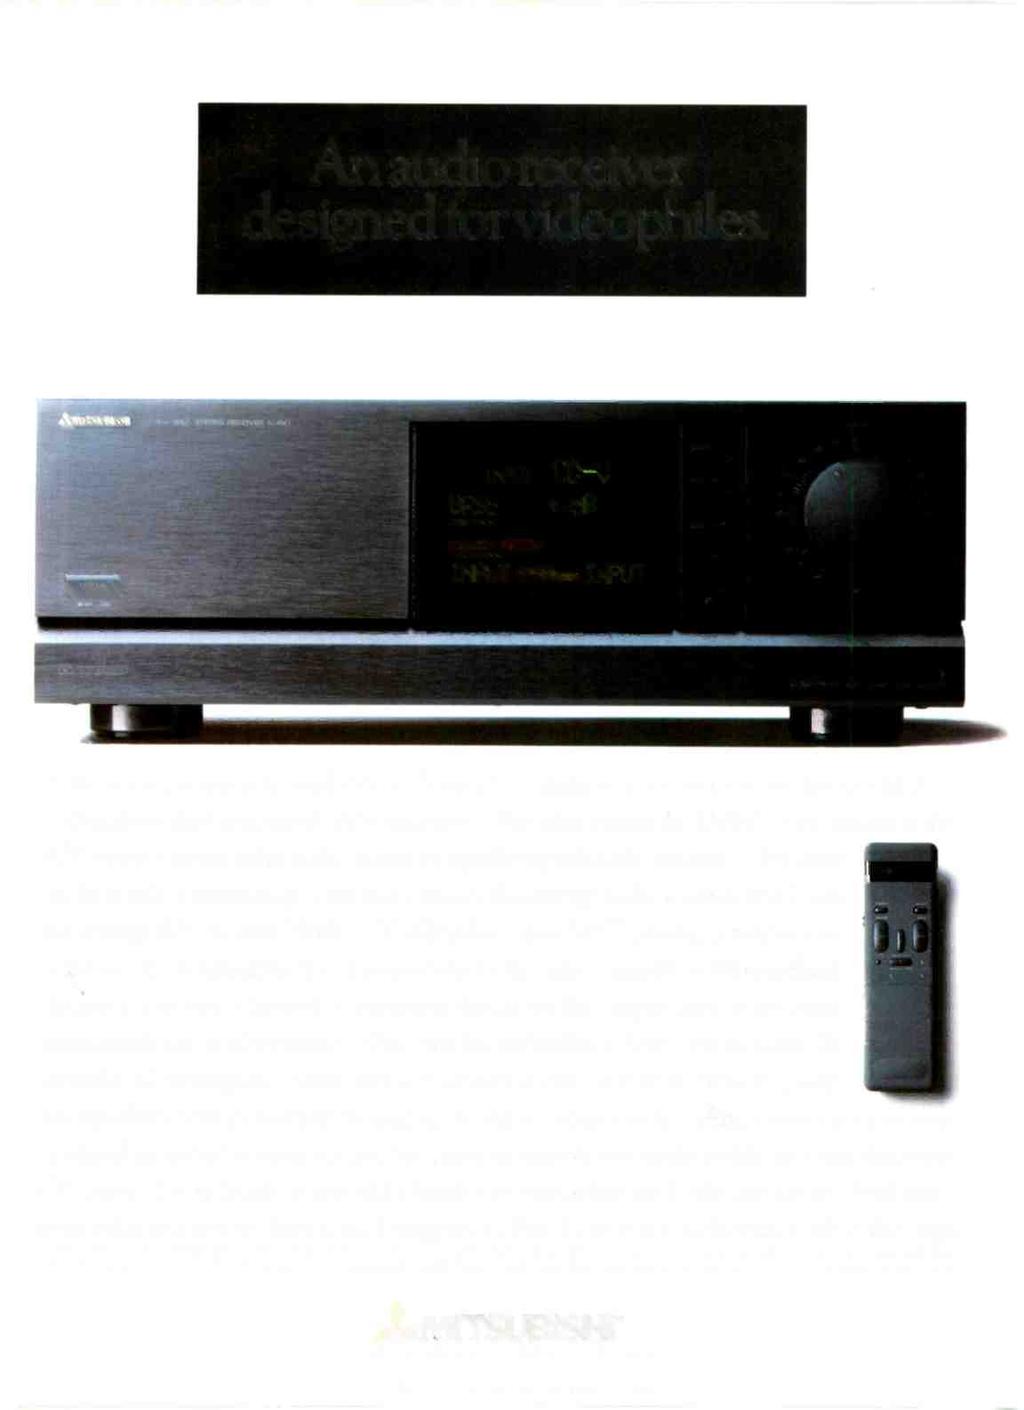 An audio receiver designed for videophiles.